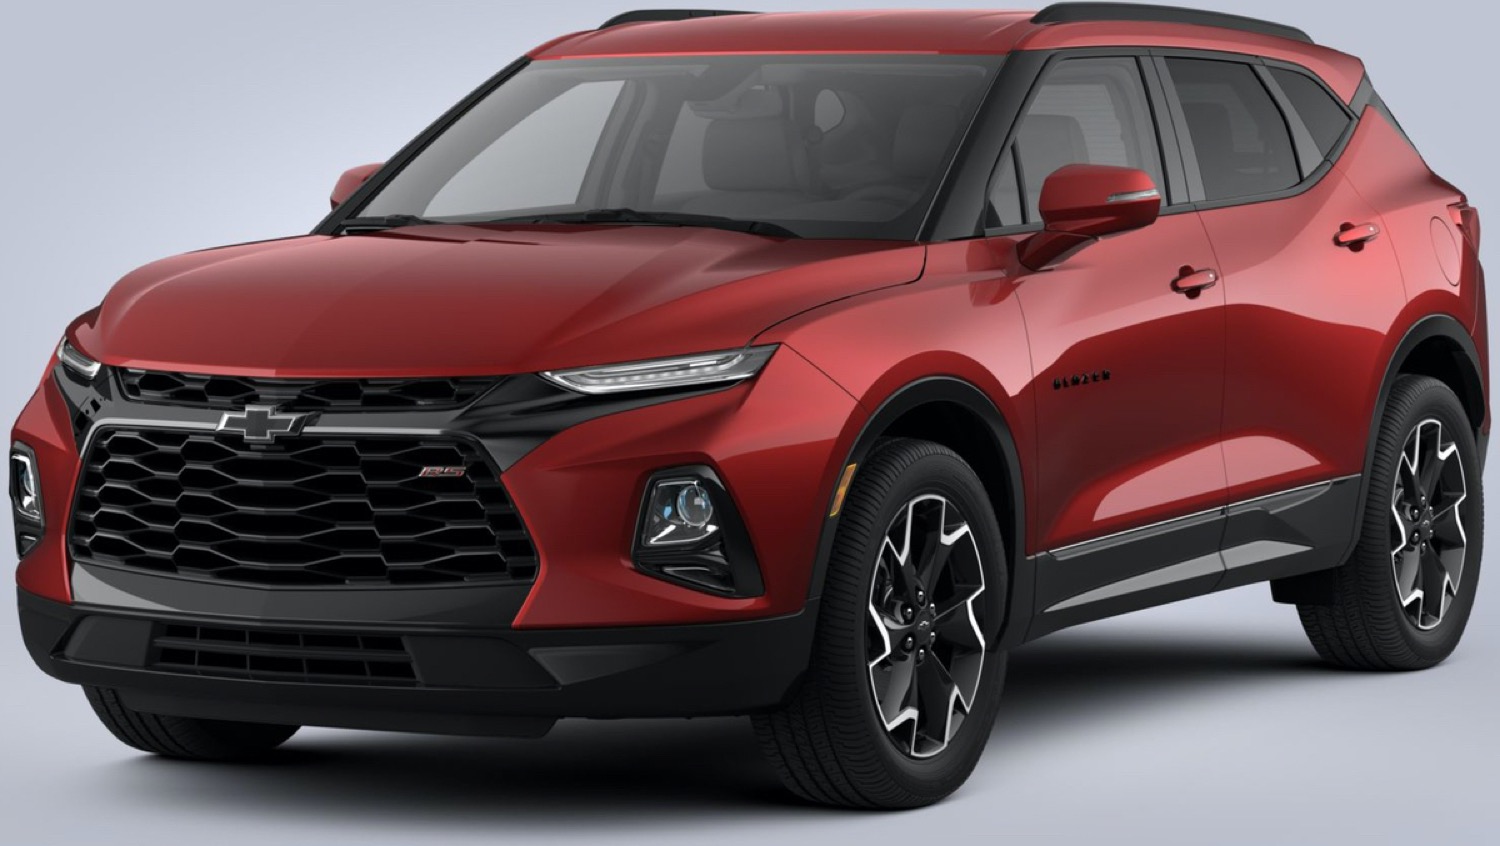 2021 Chevrolet Blazer Gets New Cherry Red Tintcoat Color | GM Authority